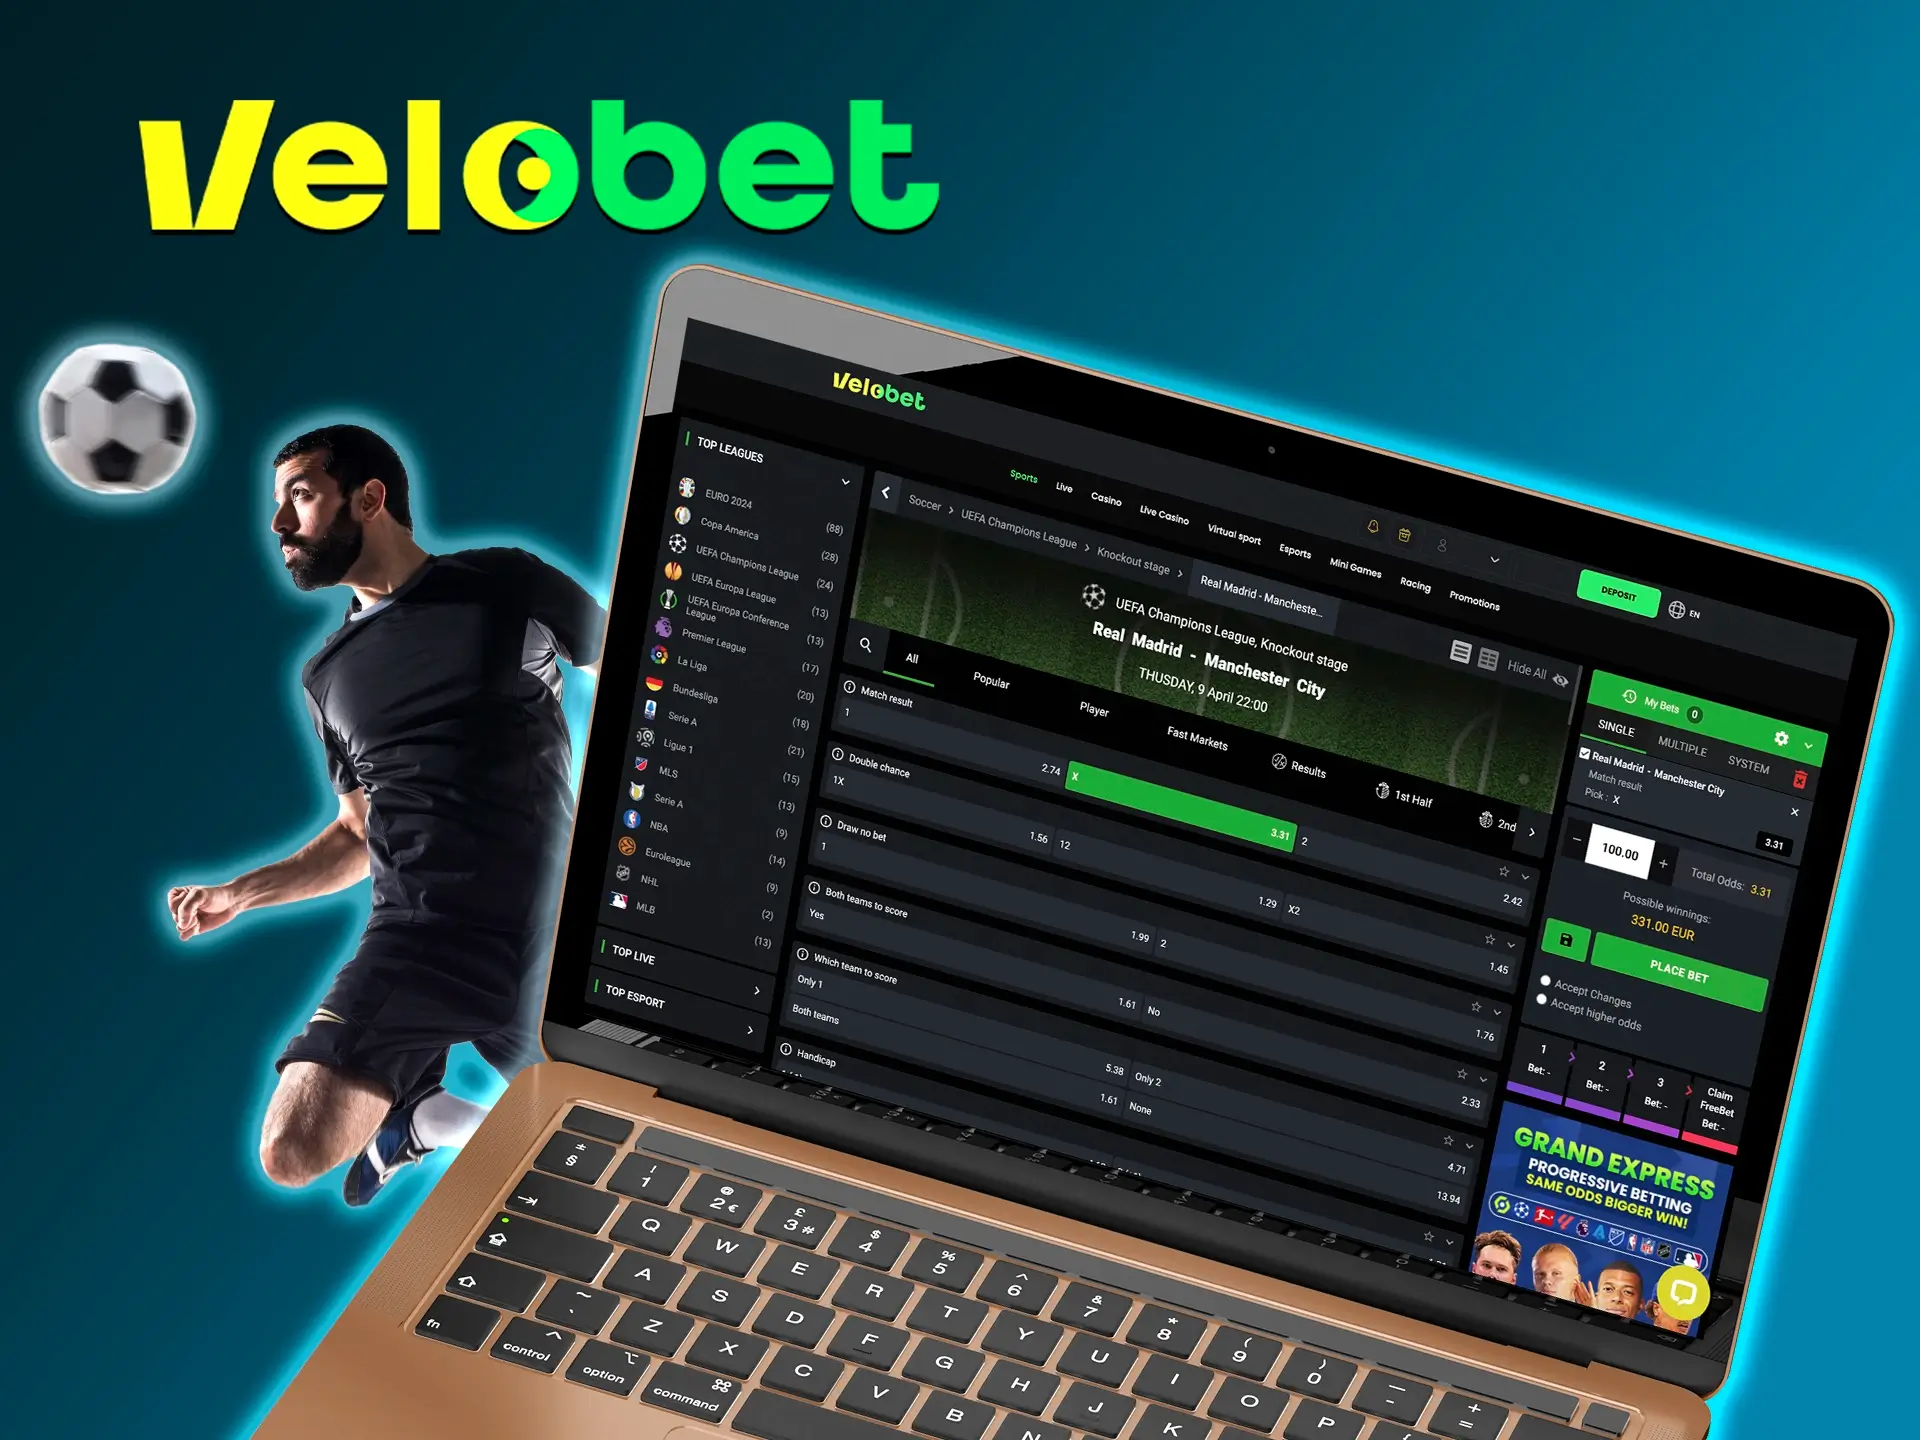 Place your bets at Velobet before the match if you are an ardent fan of your favourite team.